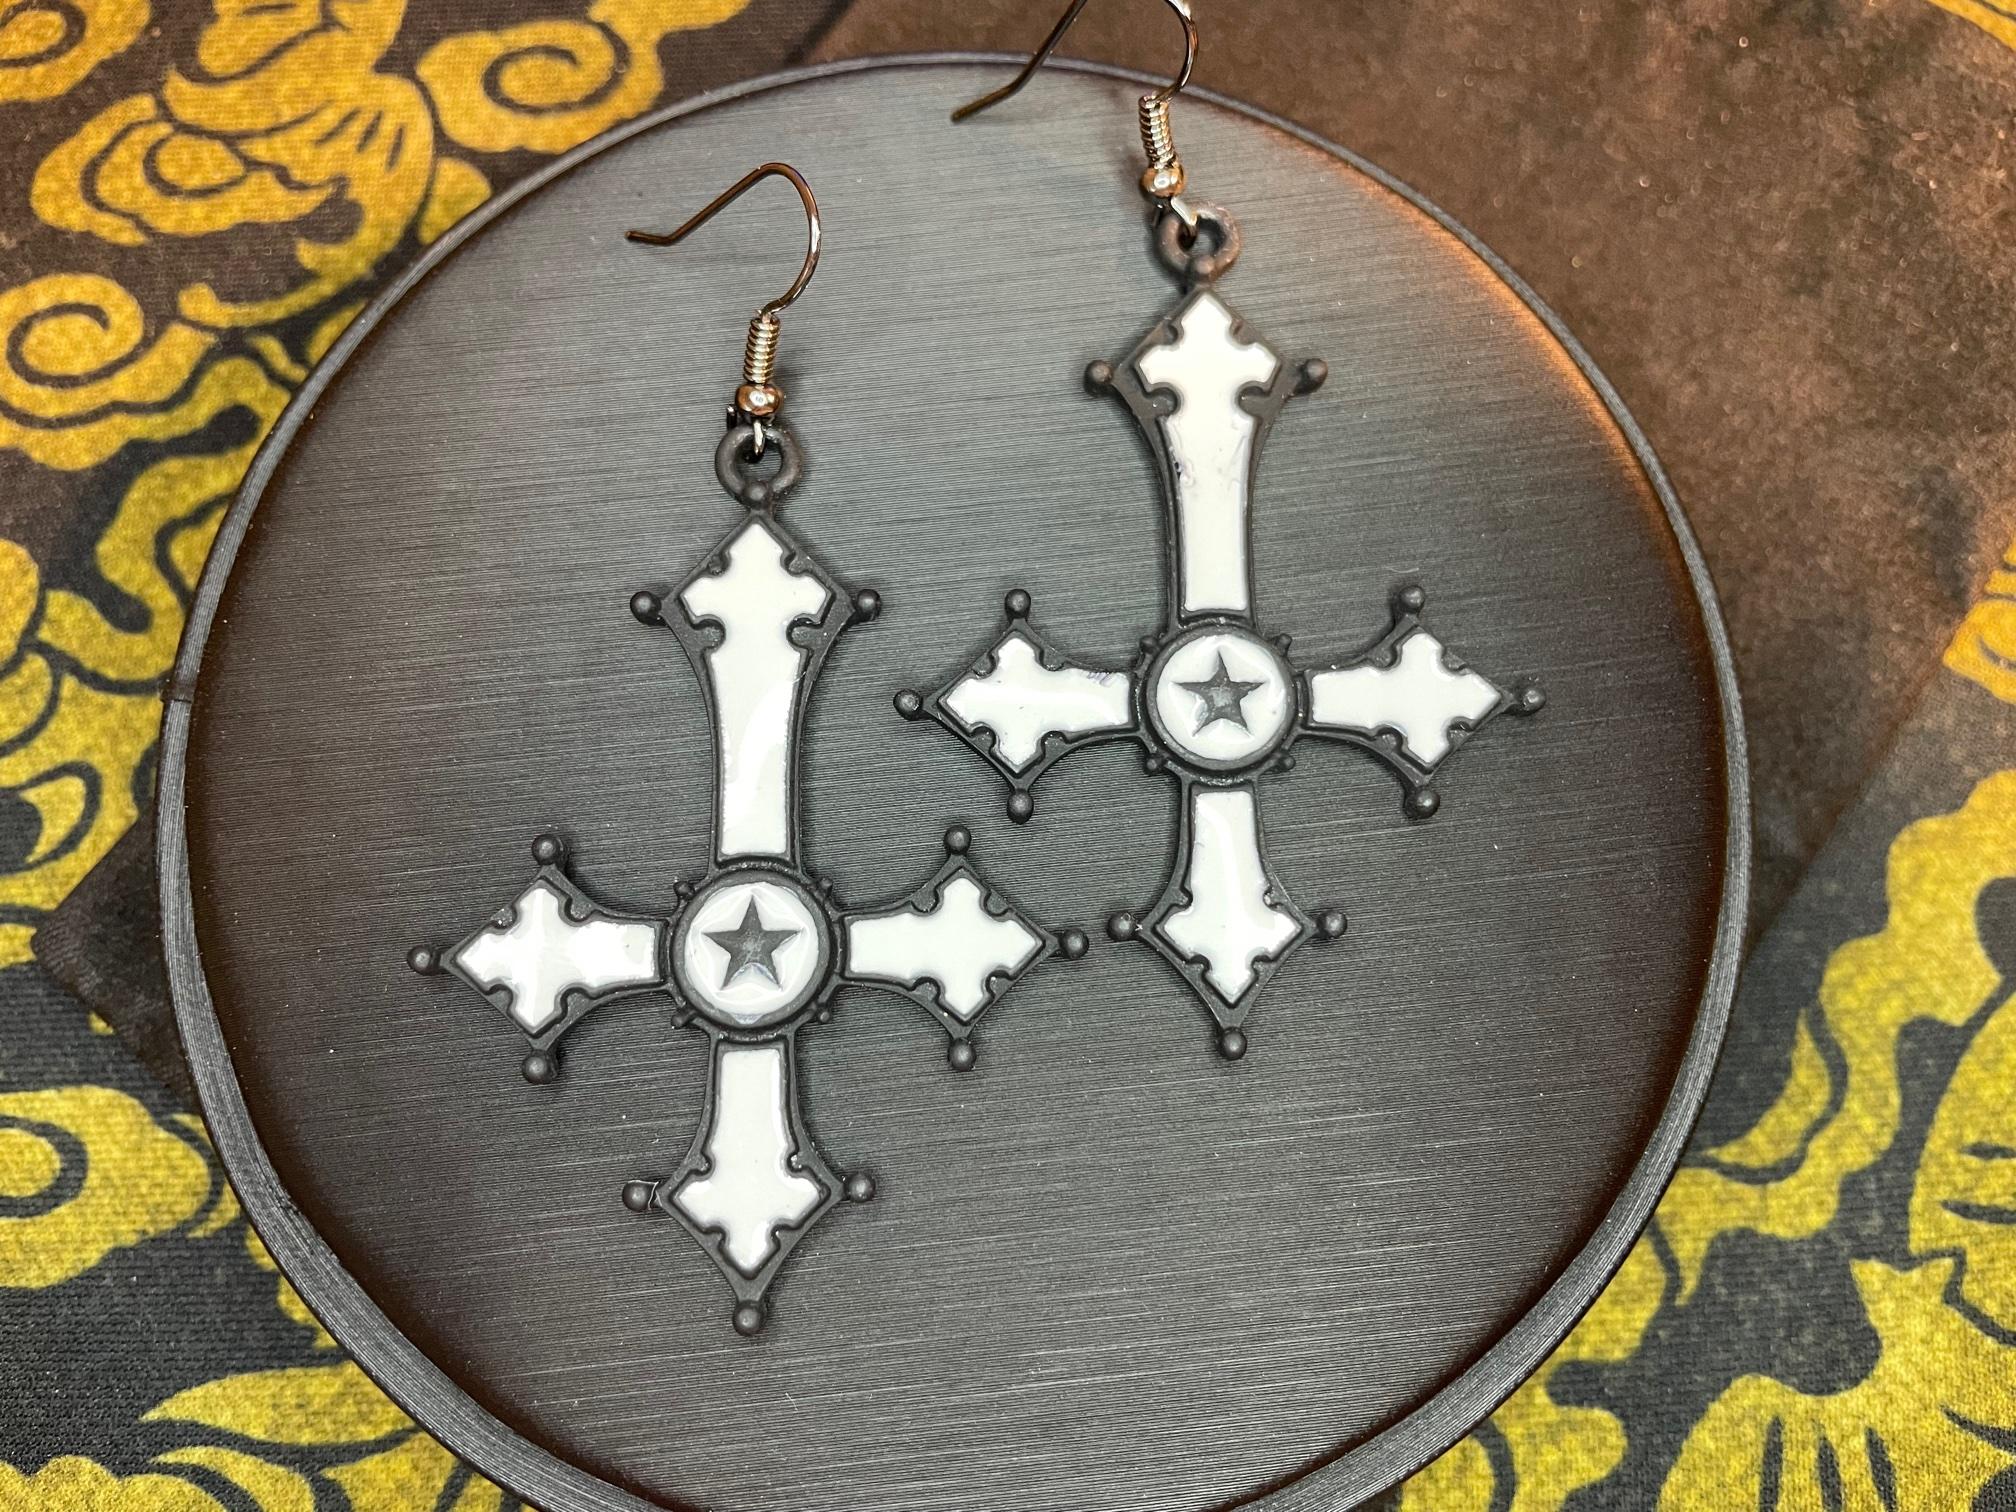 upside down lucifer cross inverted crucifix star steel pendant earrings gothic satanic wiccan occult darkness jewelry